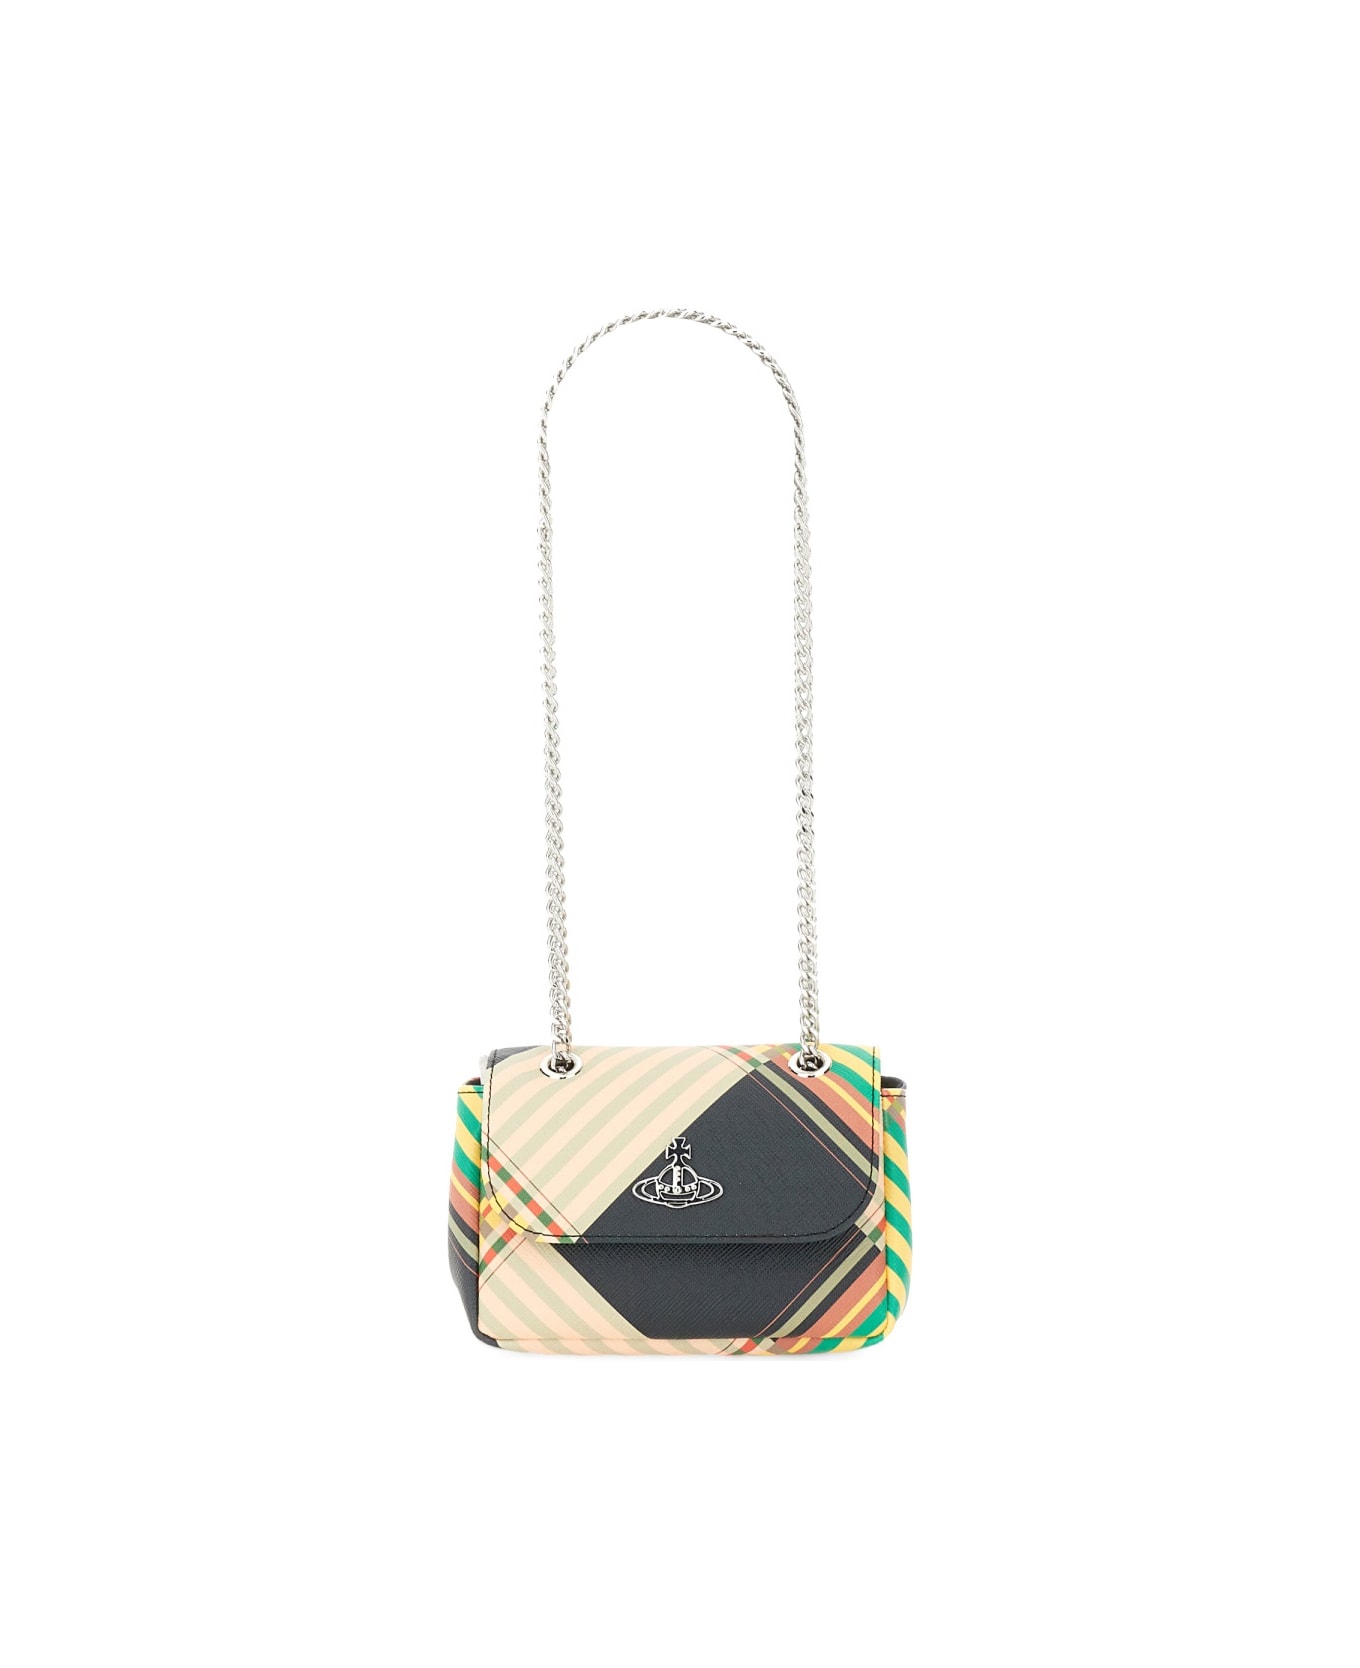 Vivienne Westwood Small Bag With Chain - MULTICOLOUR ショルダーバッグ